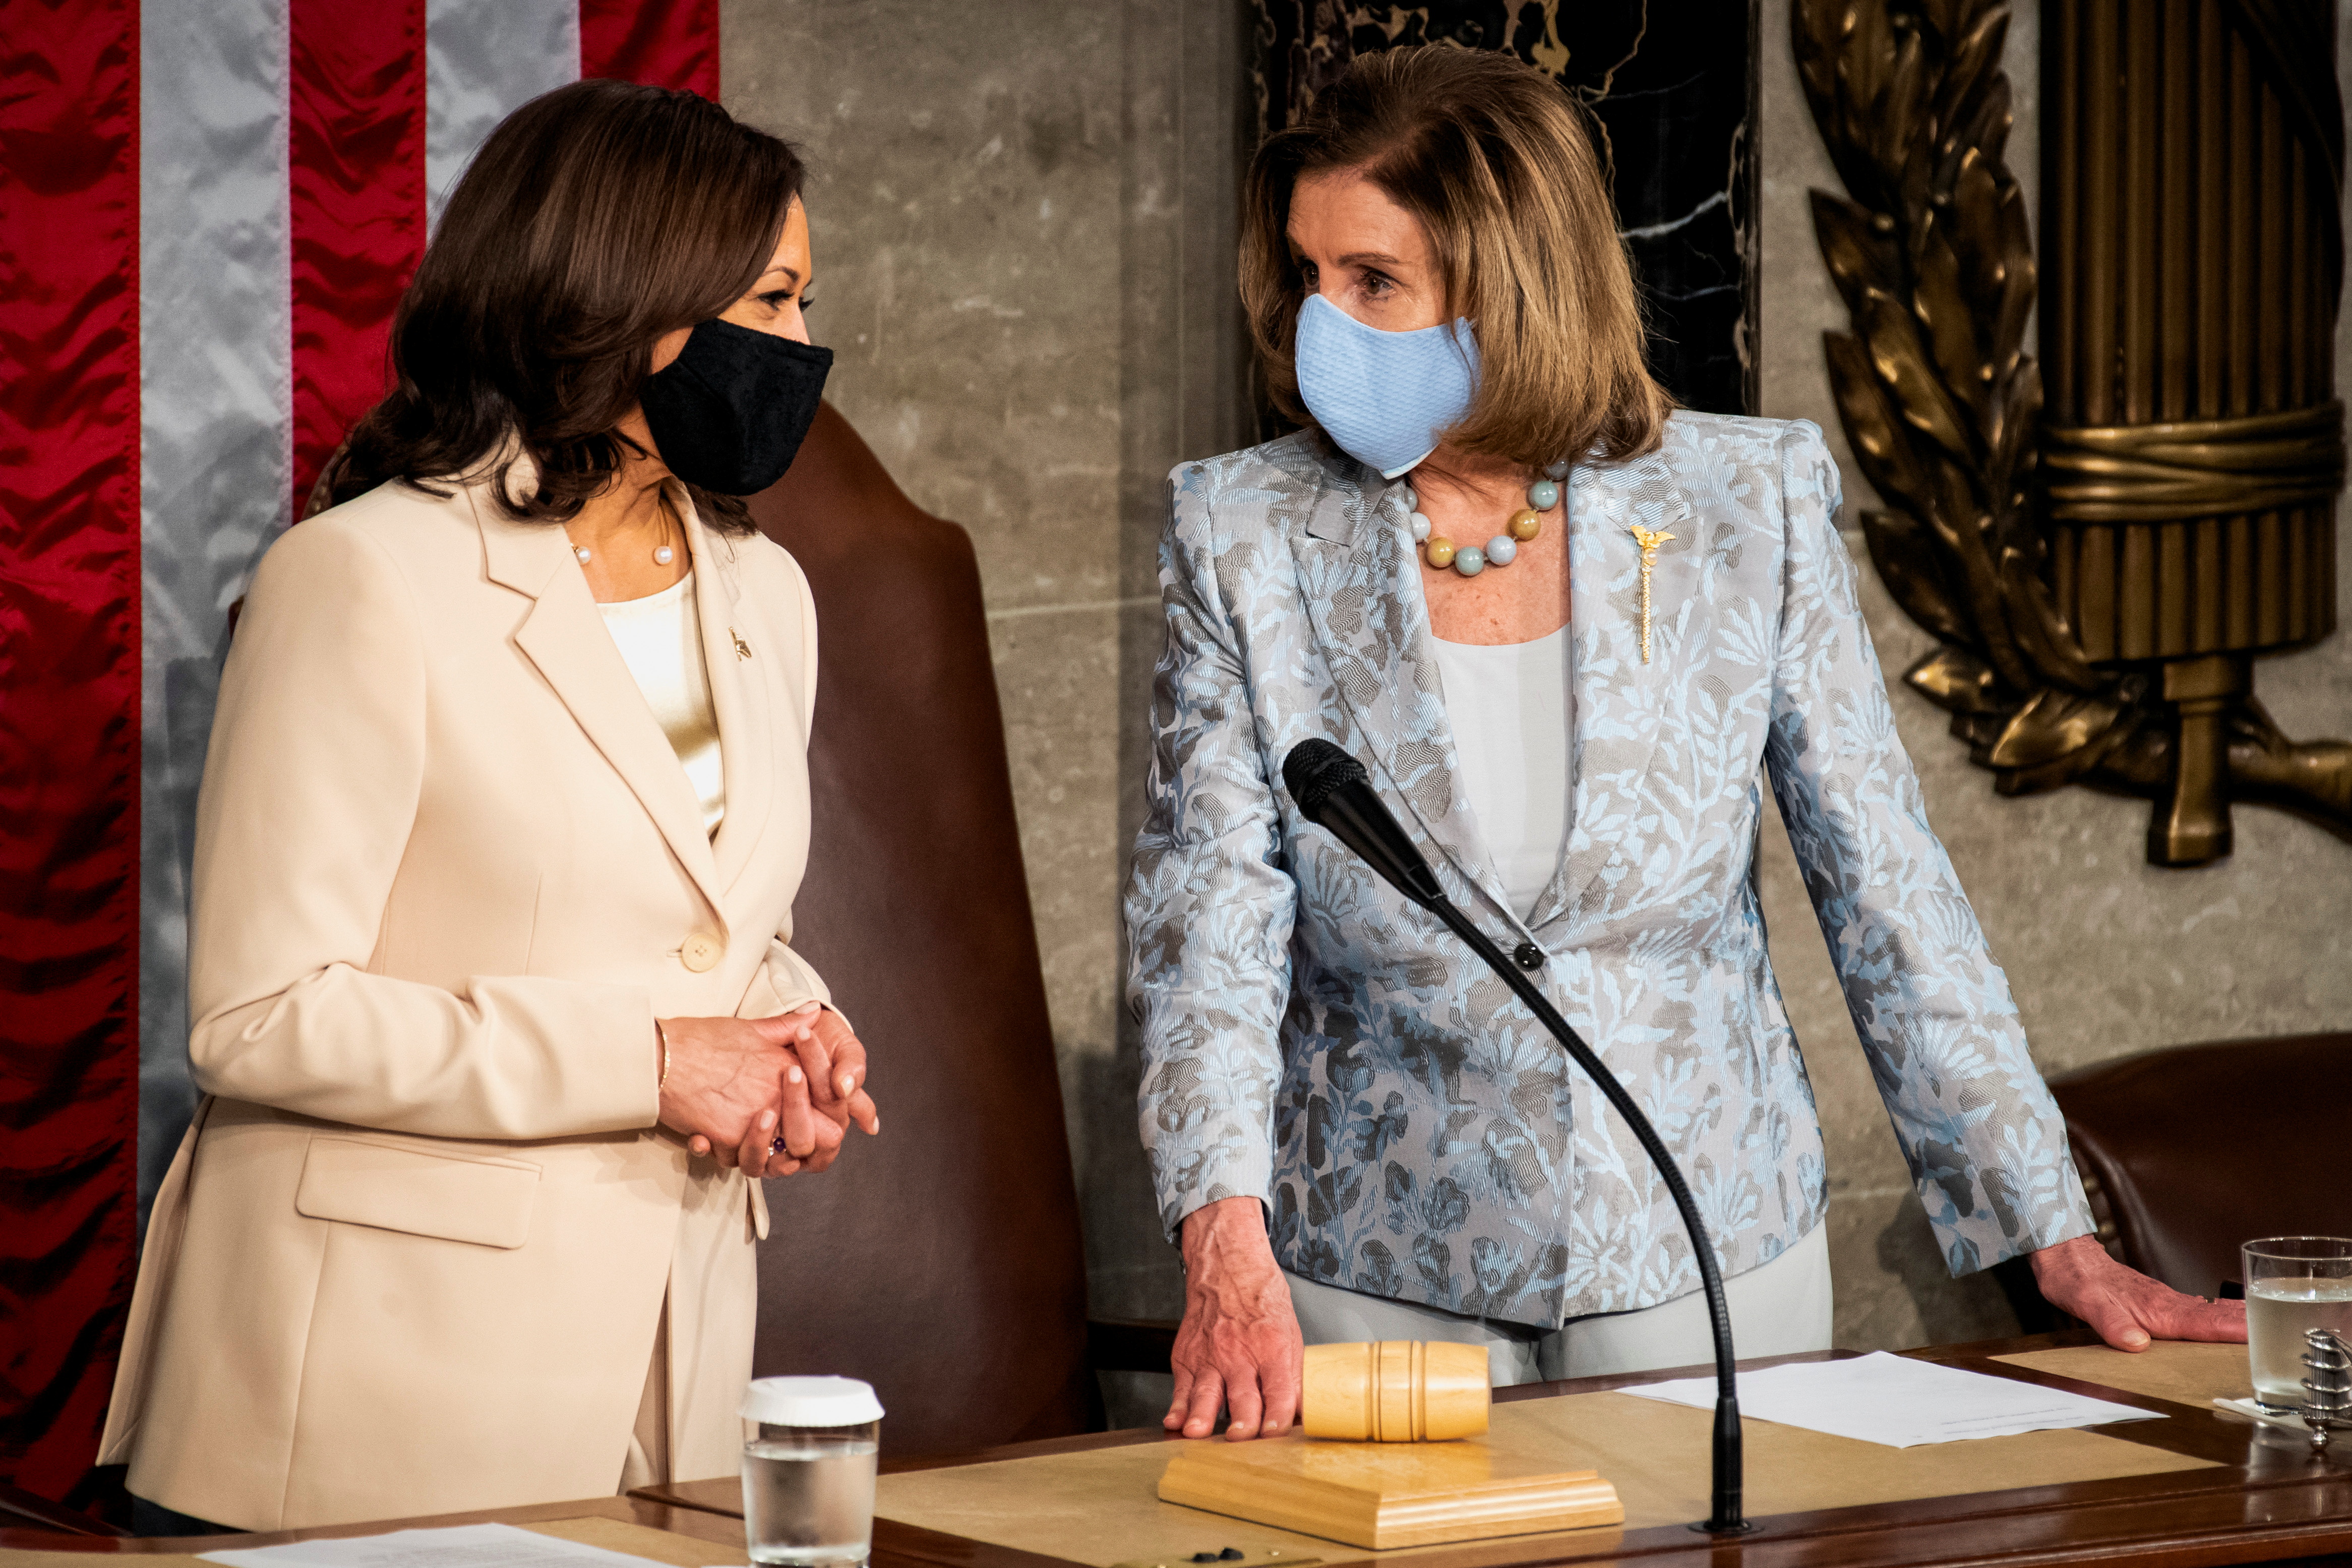 U.S. Vice President Kamala Harris and Speaker of the House Nancy Pelosi talk before the start of President Joe Biden's address to the joint session of Congress at the U.S. Capitol in Washington